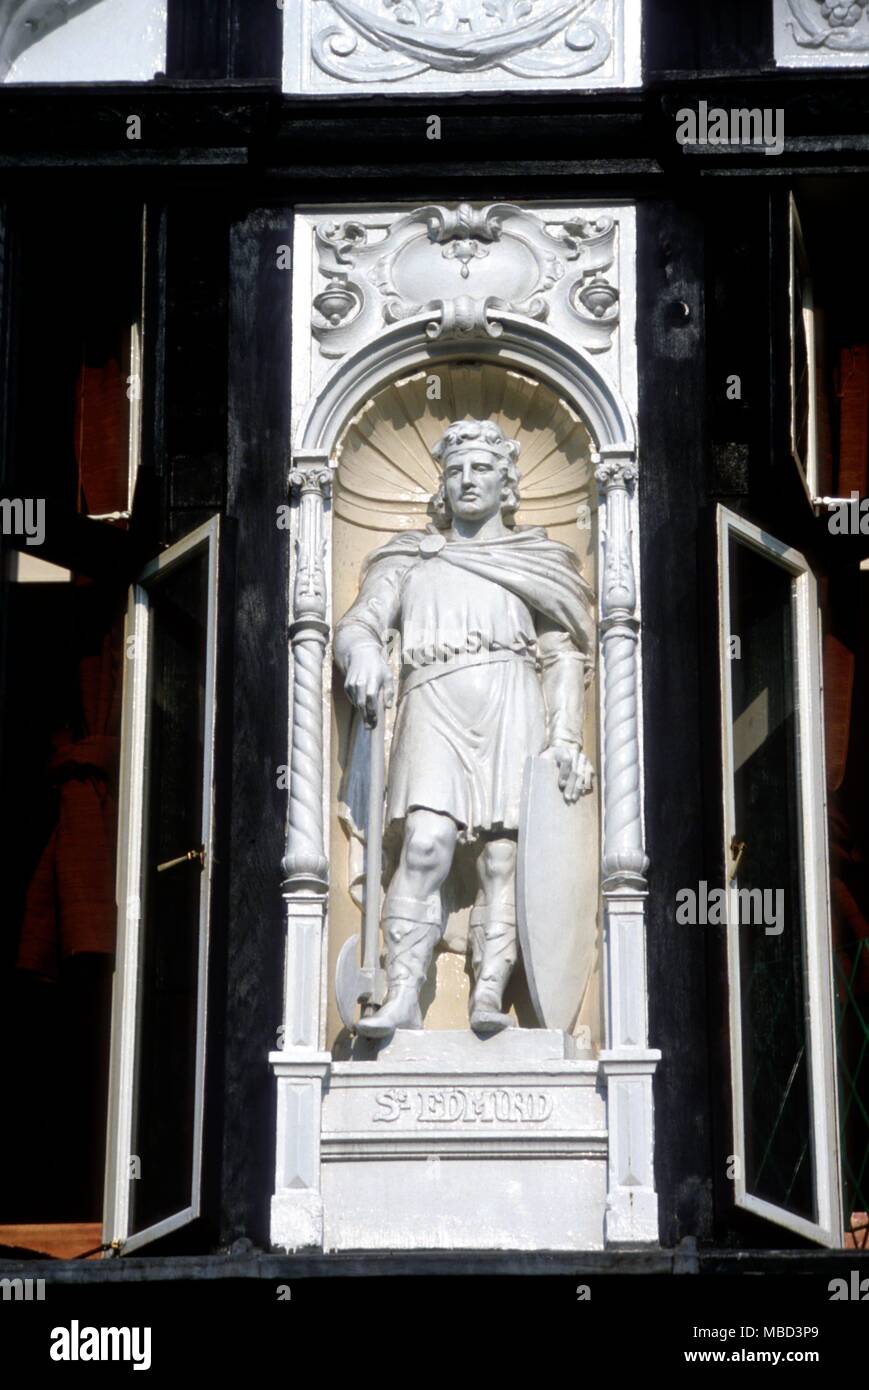 Image of St. Edmund in the facade of a mock-Tudor house in Bury St. Edmunds. Edmund the Martyr (circa 840 - November 20, 870) was a King of East Anglia. He succeeded to the East Anglian throne in 855, while still a boy. © / Charles Walker Stock Photo